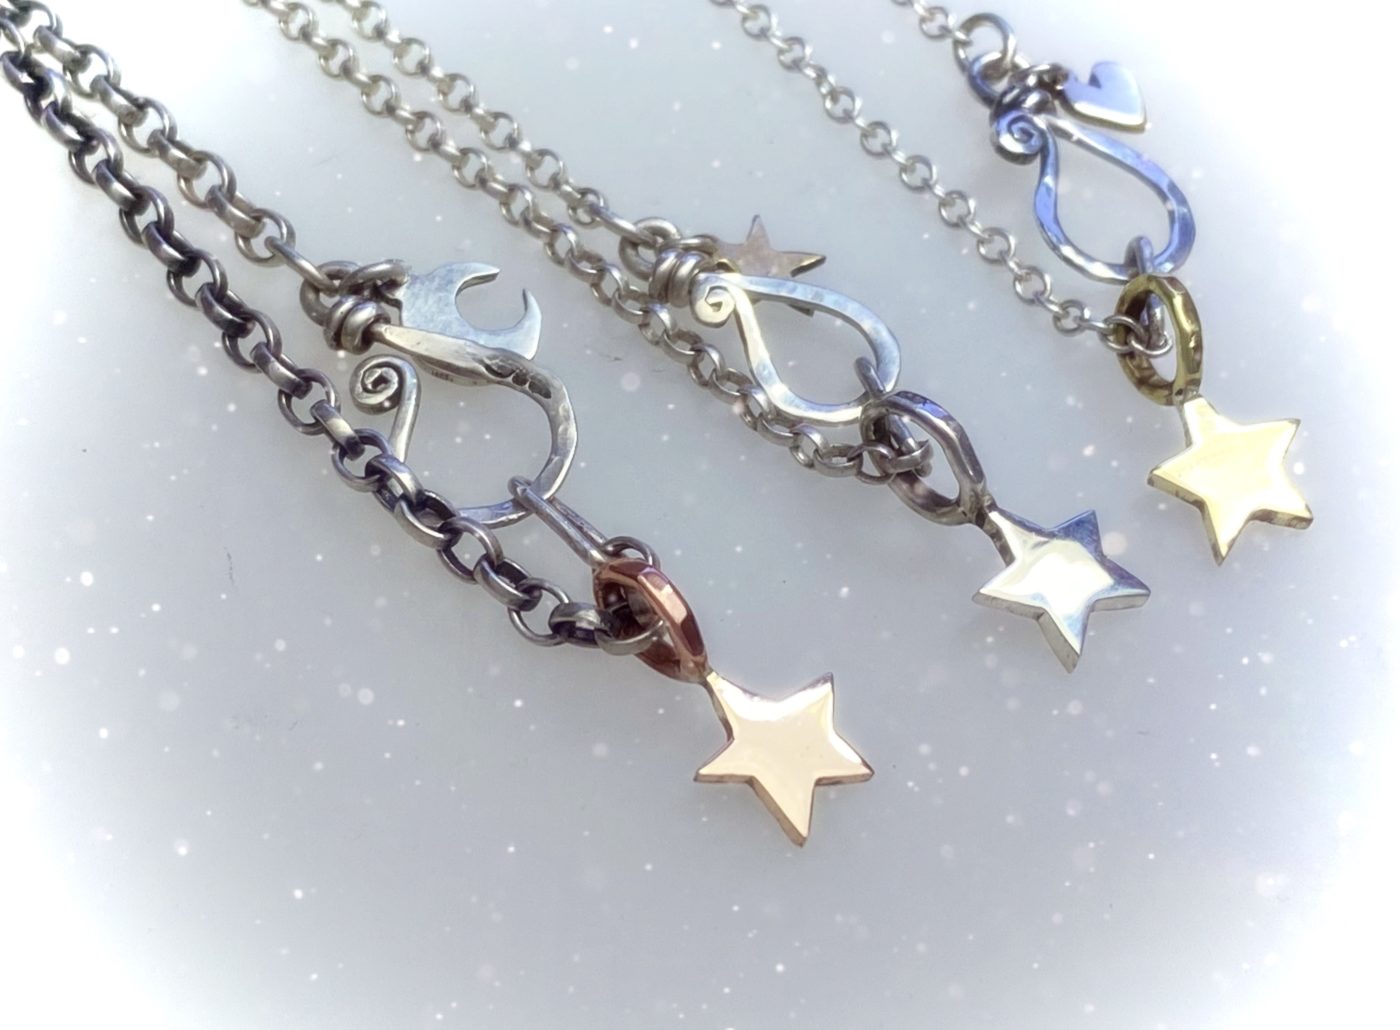 handcrafted and recycled silver star and moon charm for a tree sculpture, necklace or bracelet